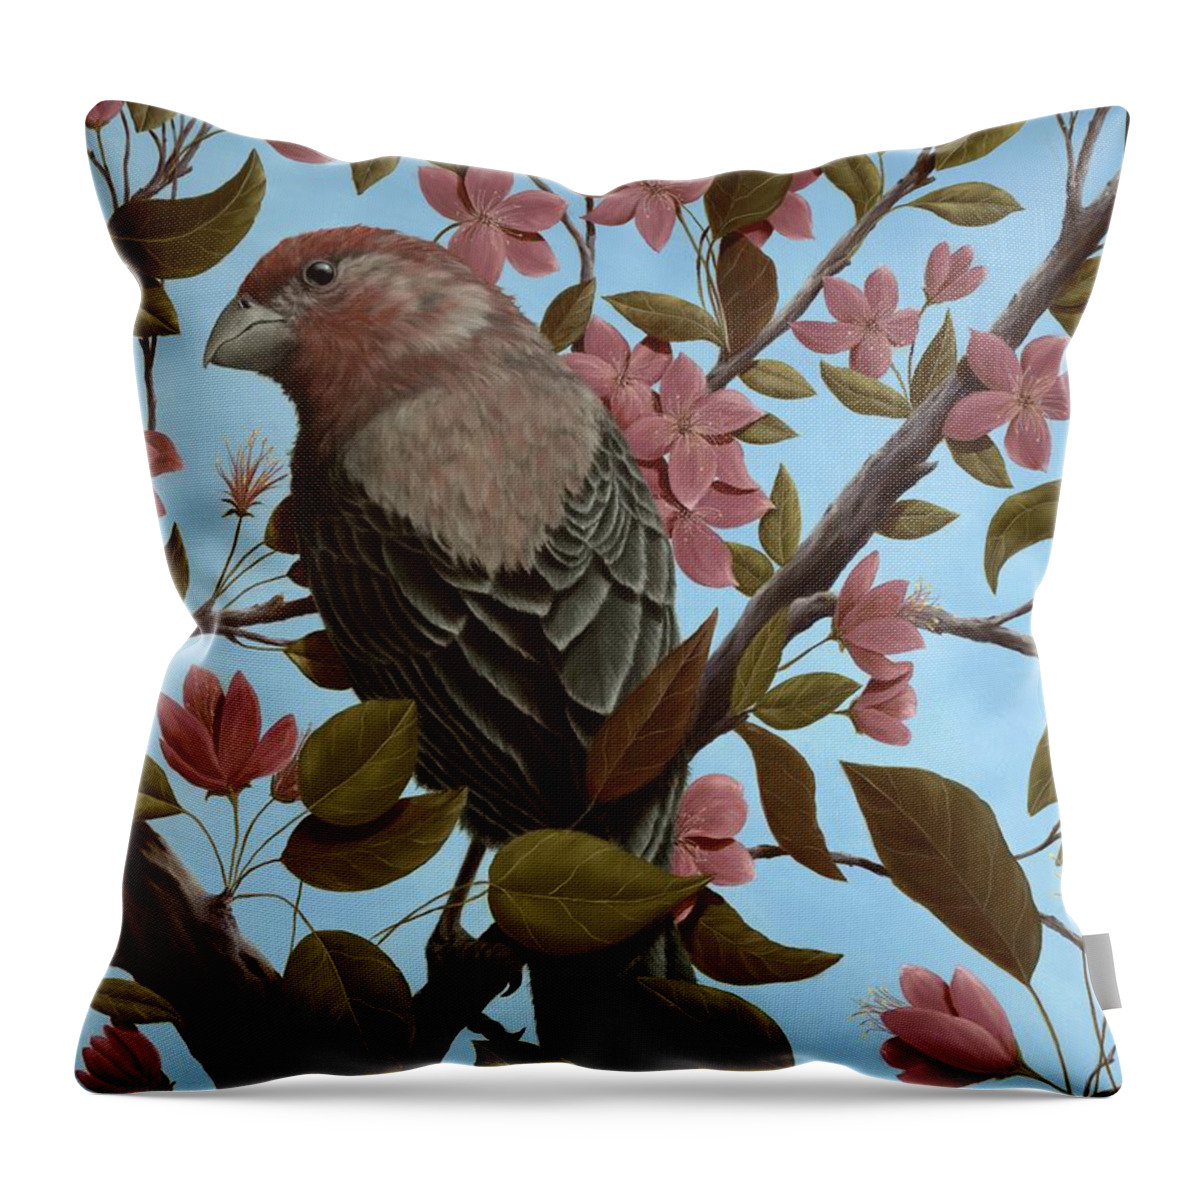 Animals Throw Pillow featuring the painting House Finch by Rick Bainbridge